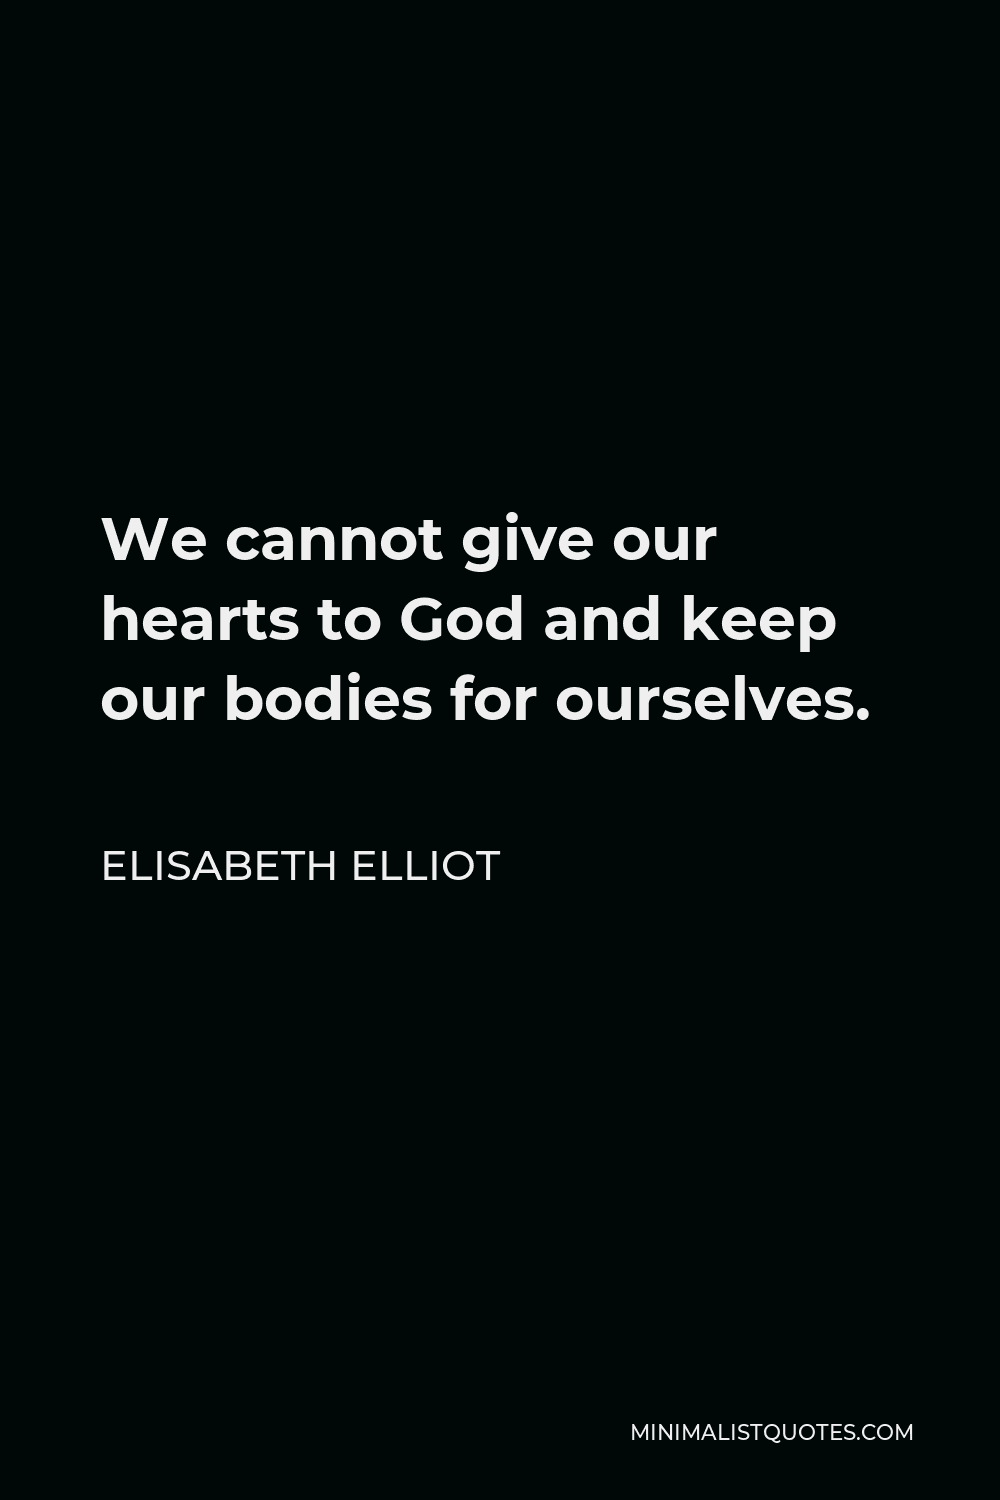 Elisabeth Elliot Quote - We cannot give our hearts to God and keep our bodies for ourselves.